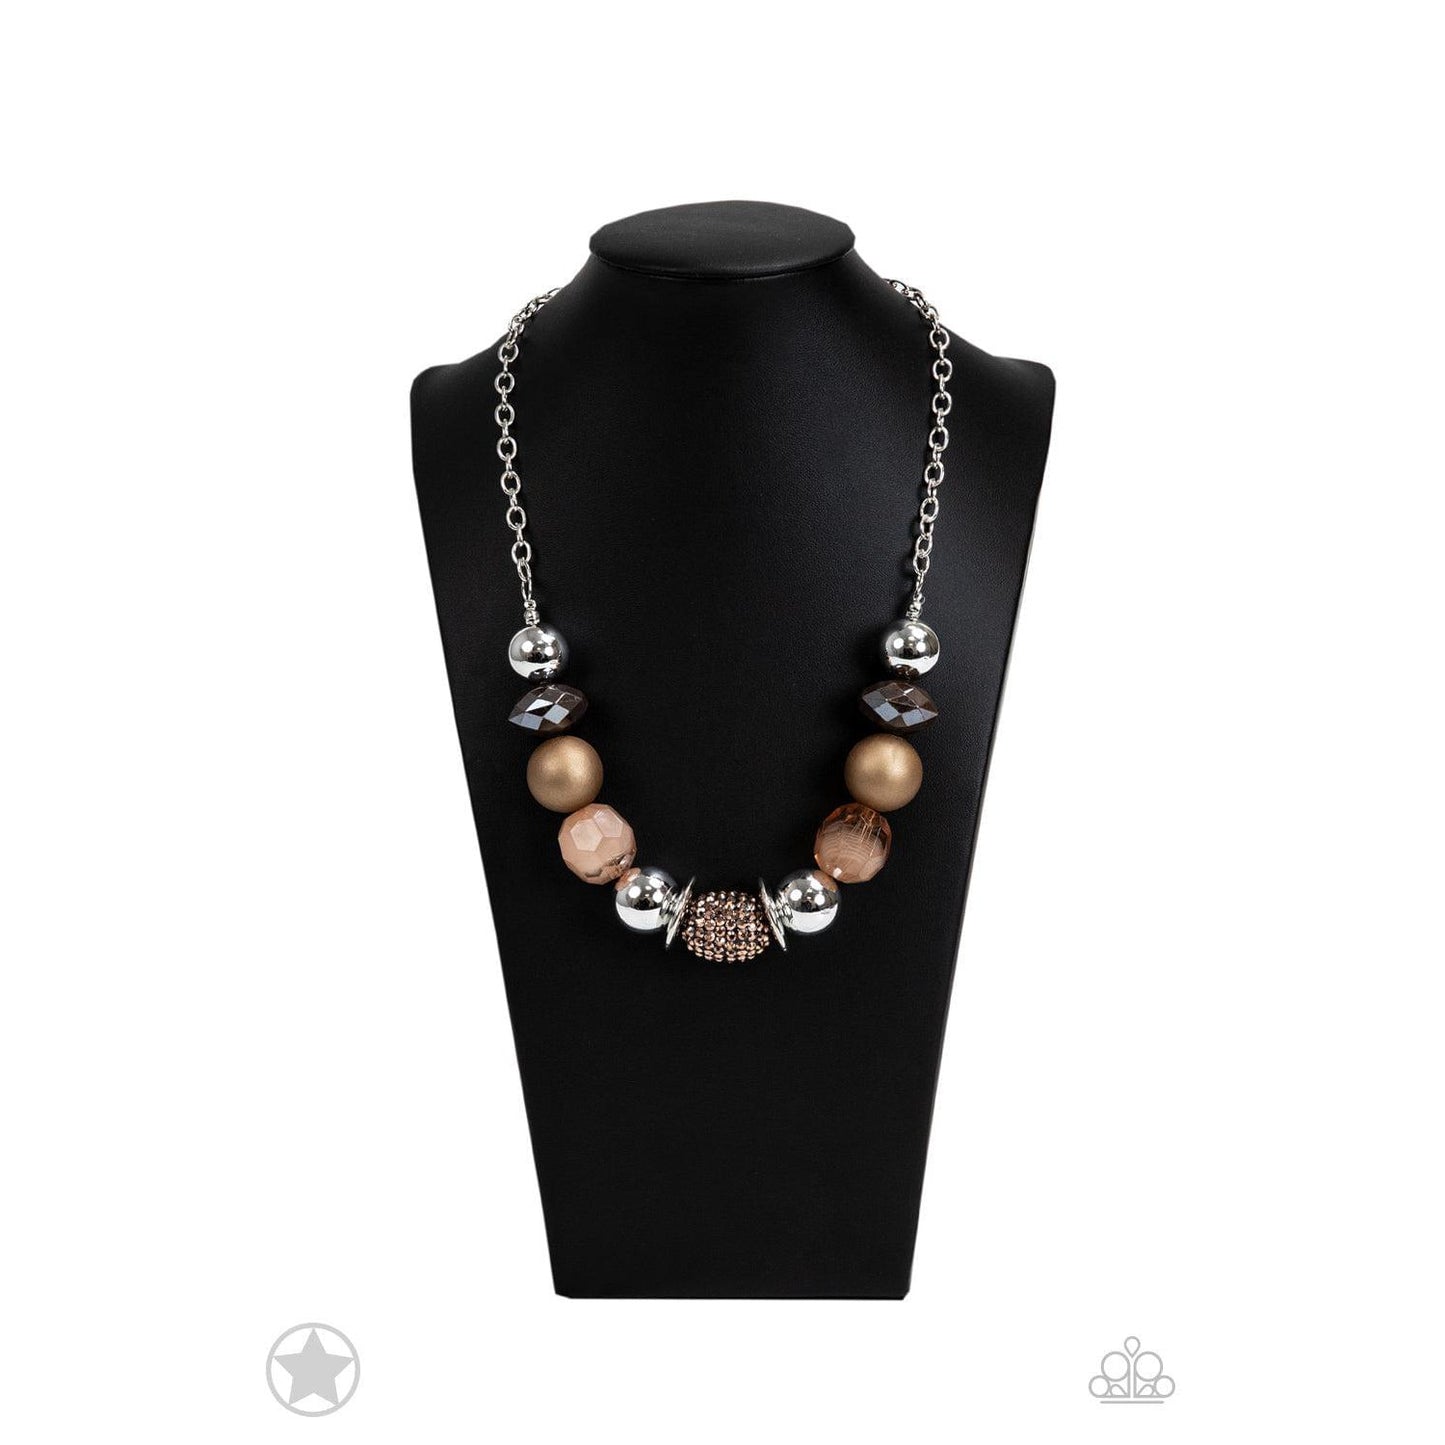 A Warm Welcome - Multi Blockbuster Necklace -  A Large Selection Hand-Chains And Jewelry On rainbowartsreview,Women's Jewelry | Necklaces, Earrings, Bracelets